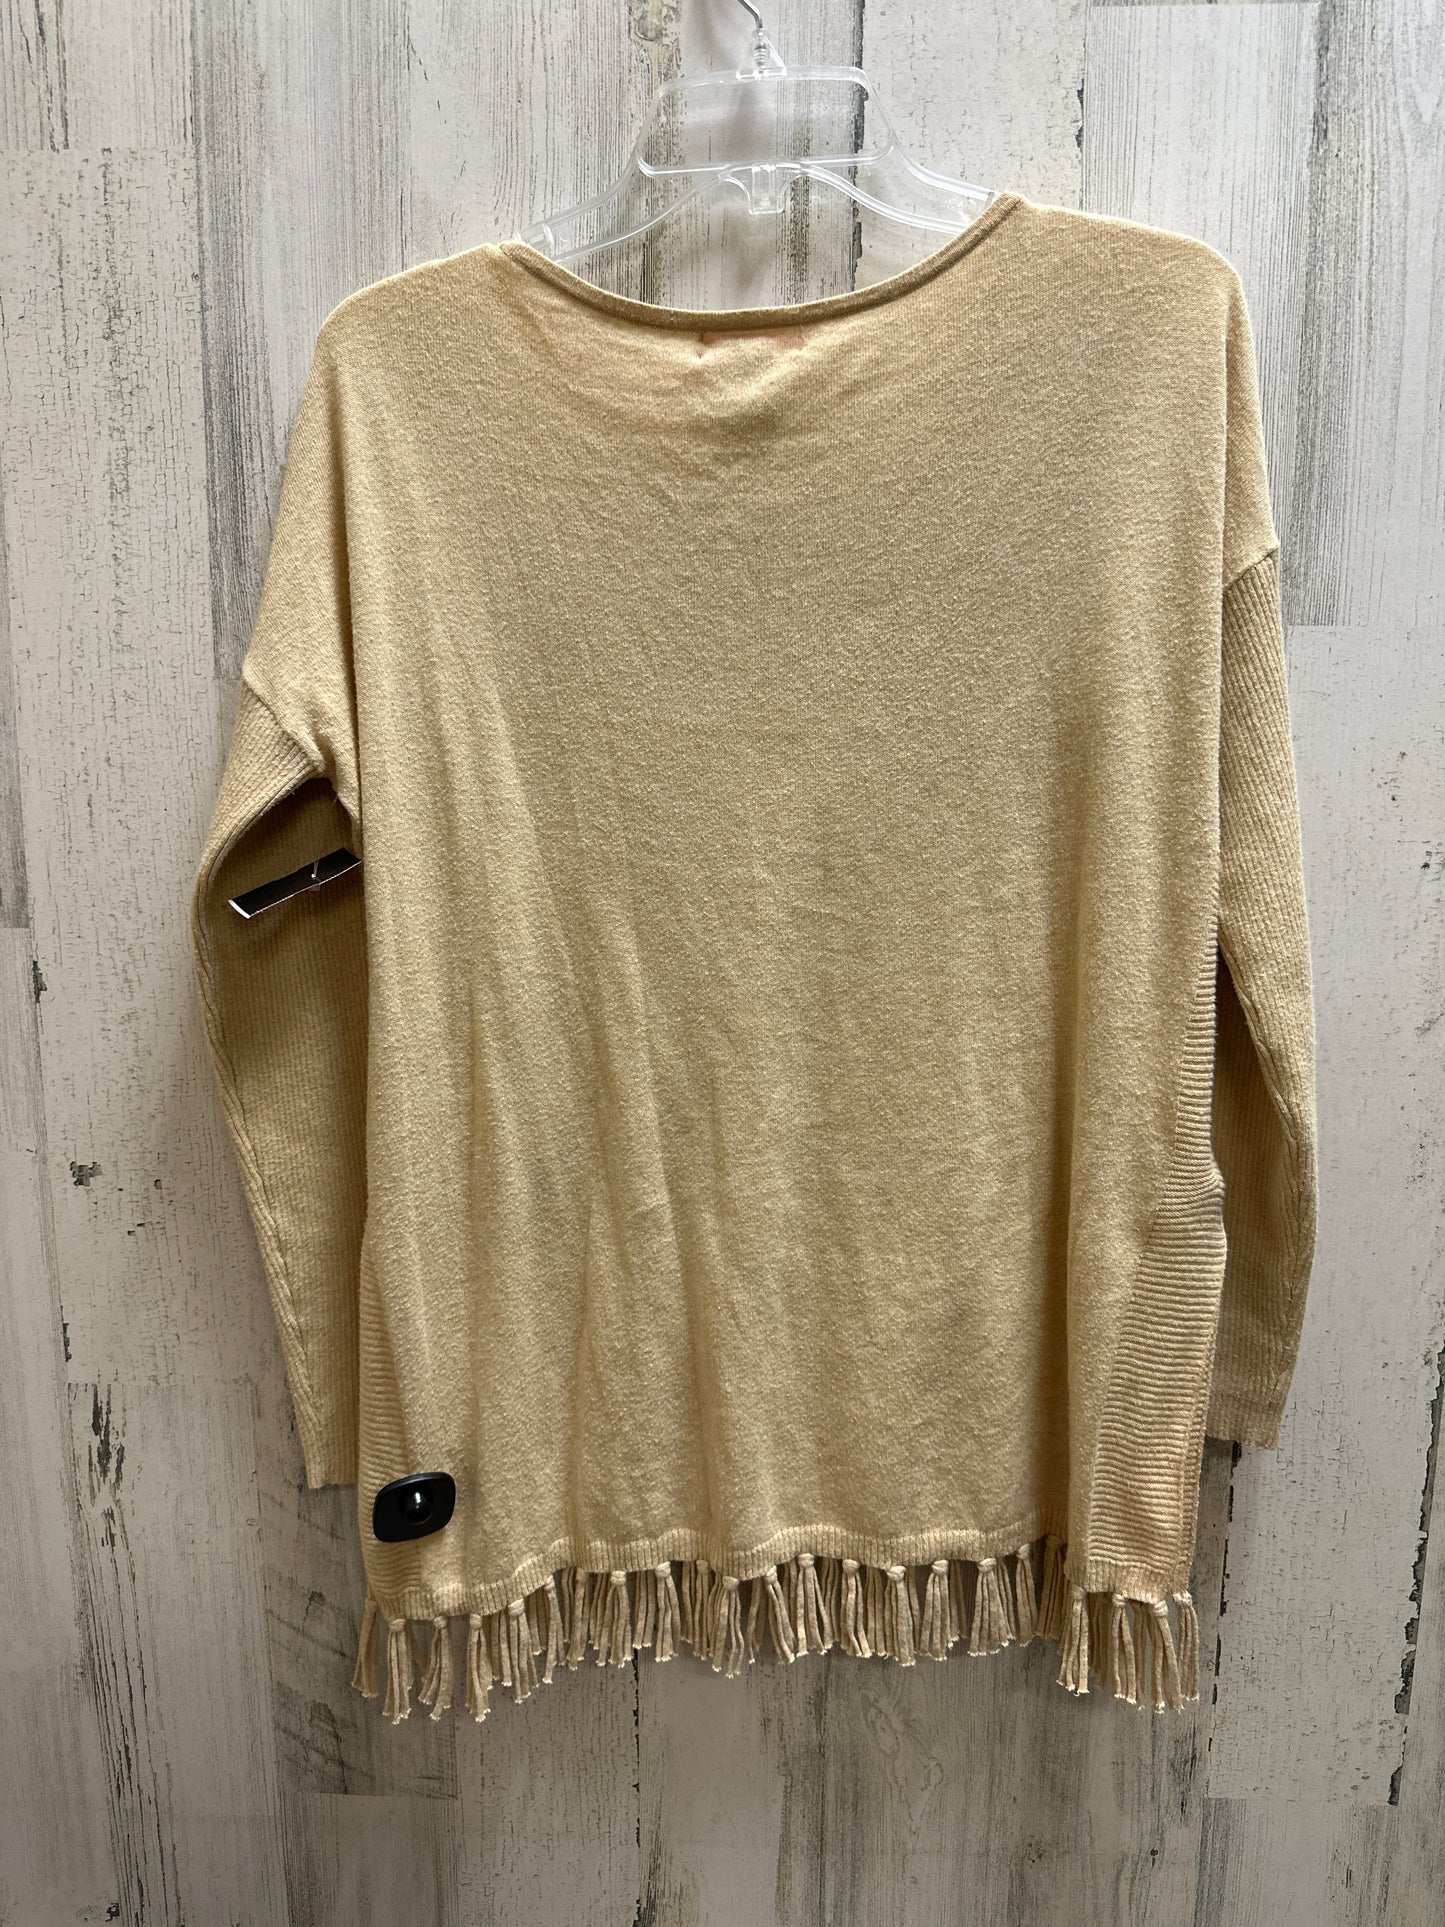 Tan Sweater Lilly Pulitzer, Size Xs